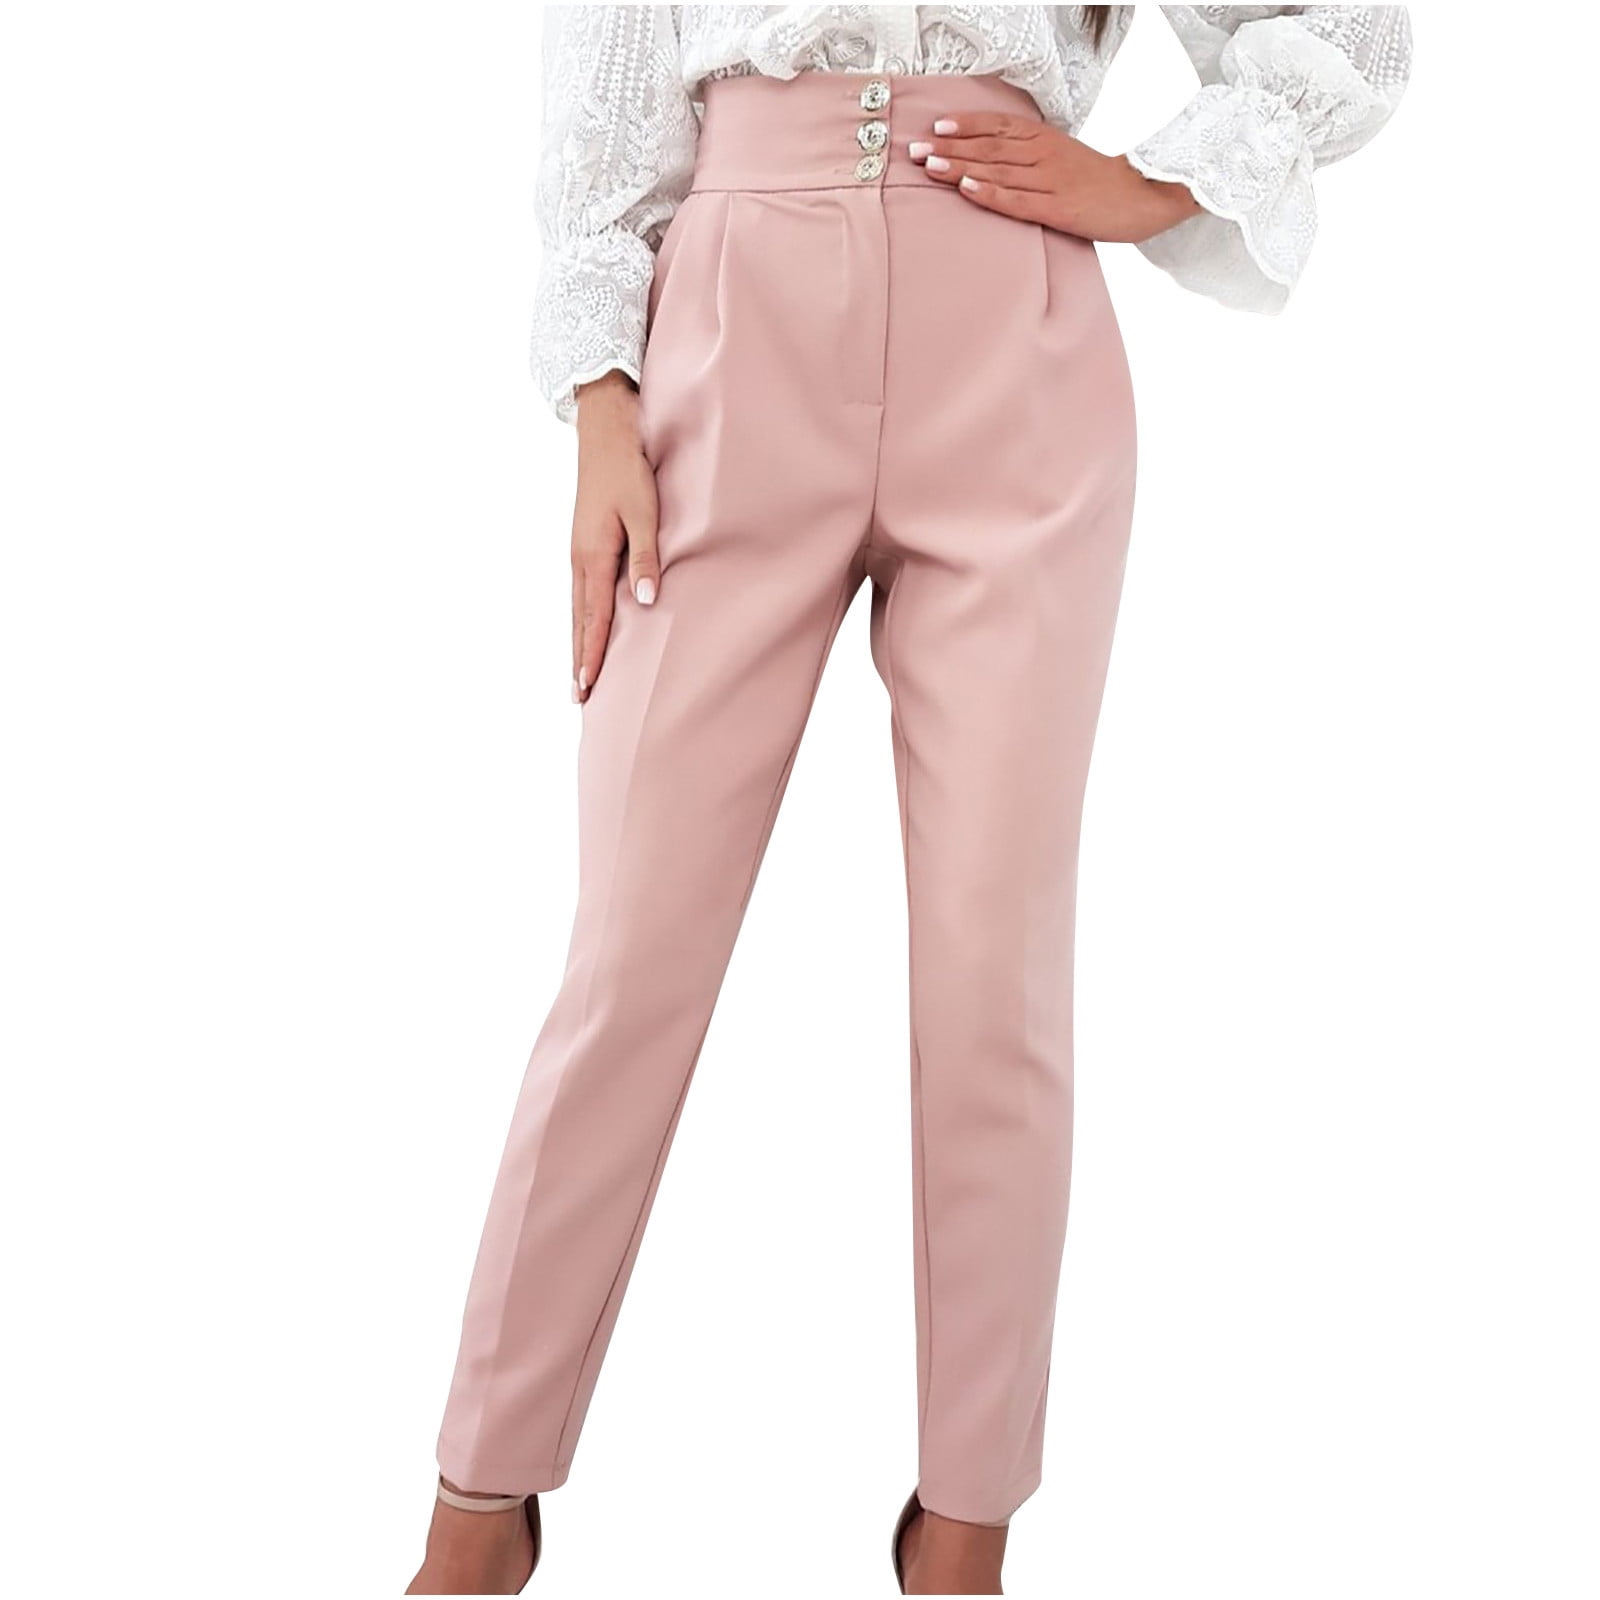 ylioge Women's Full Length Comfy Pants Buttons High Waist Slim Fit Business  Trousers Pockets Close Leg Solid Color Spring Pants Pantalones 